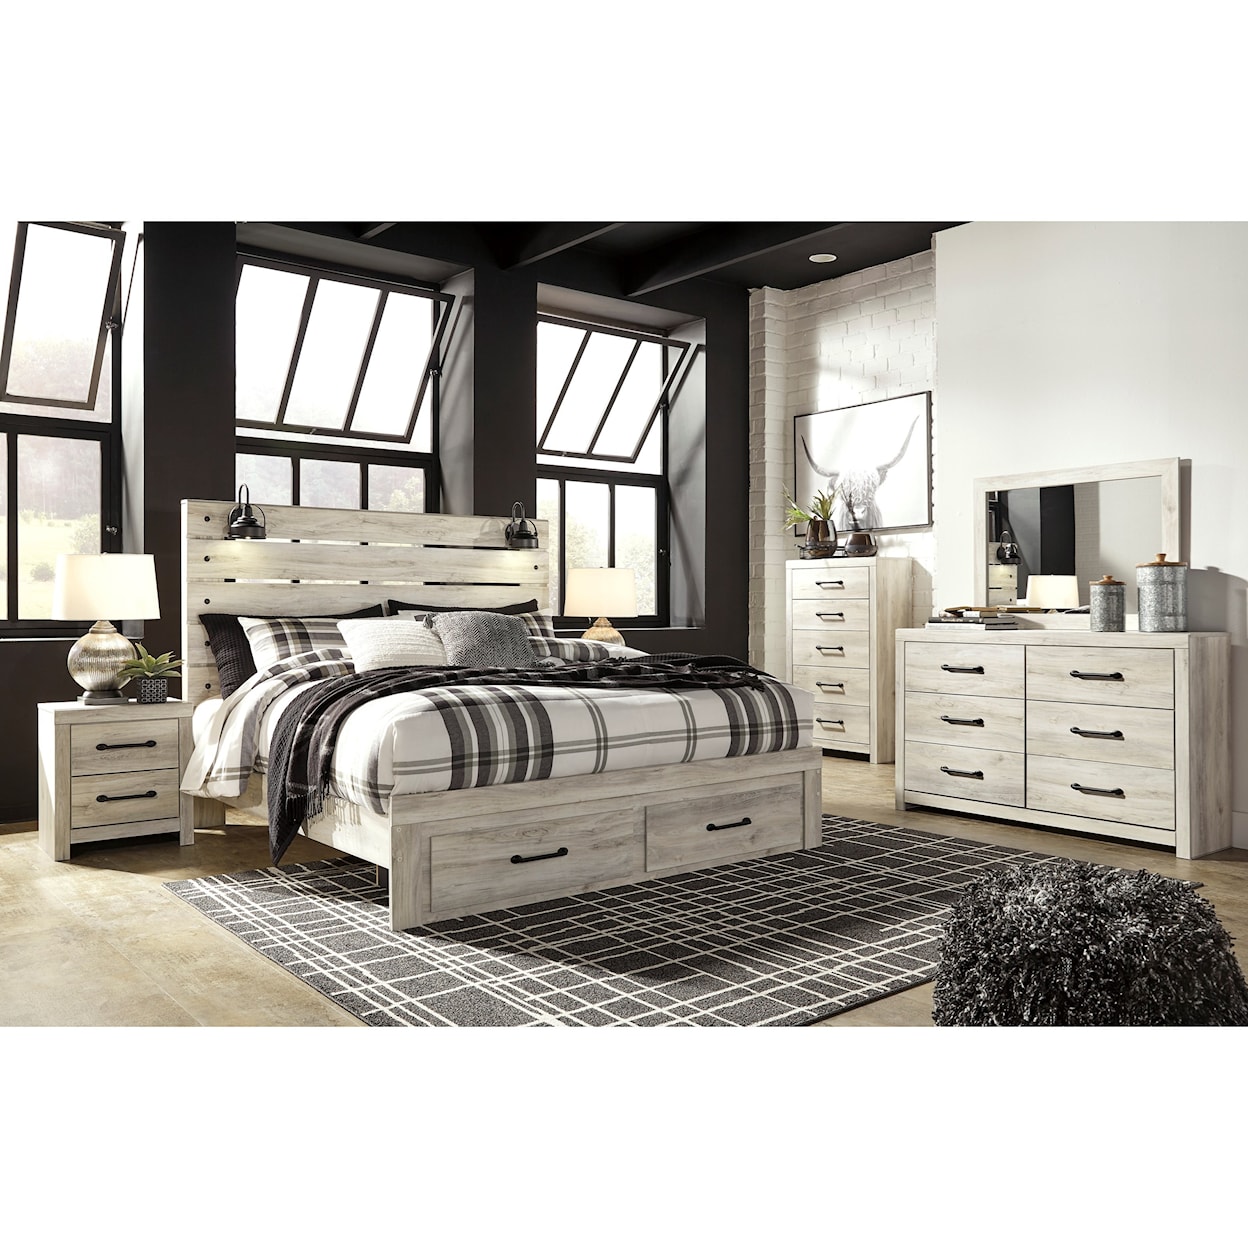 Benchcraft Cambeck King Bedroom Group